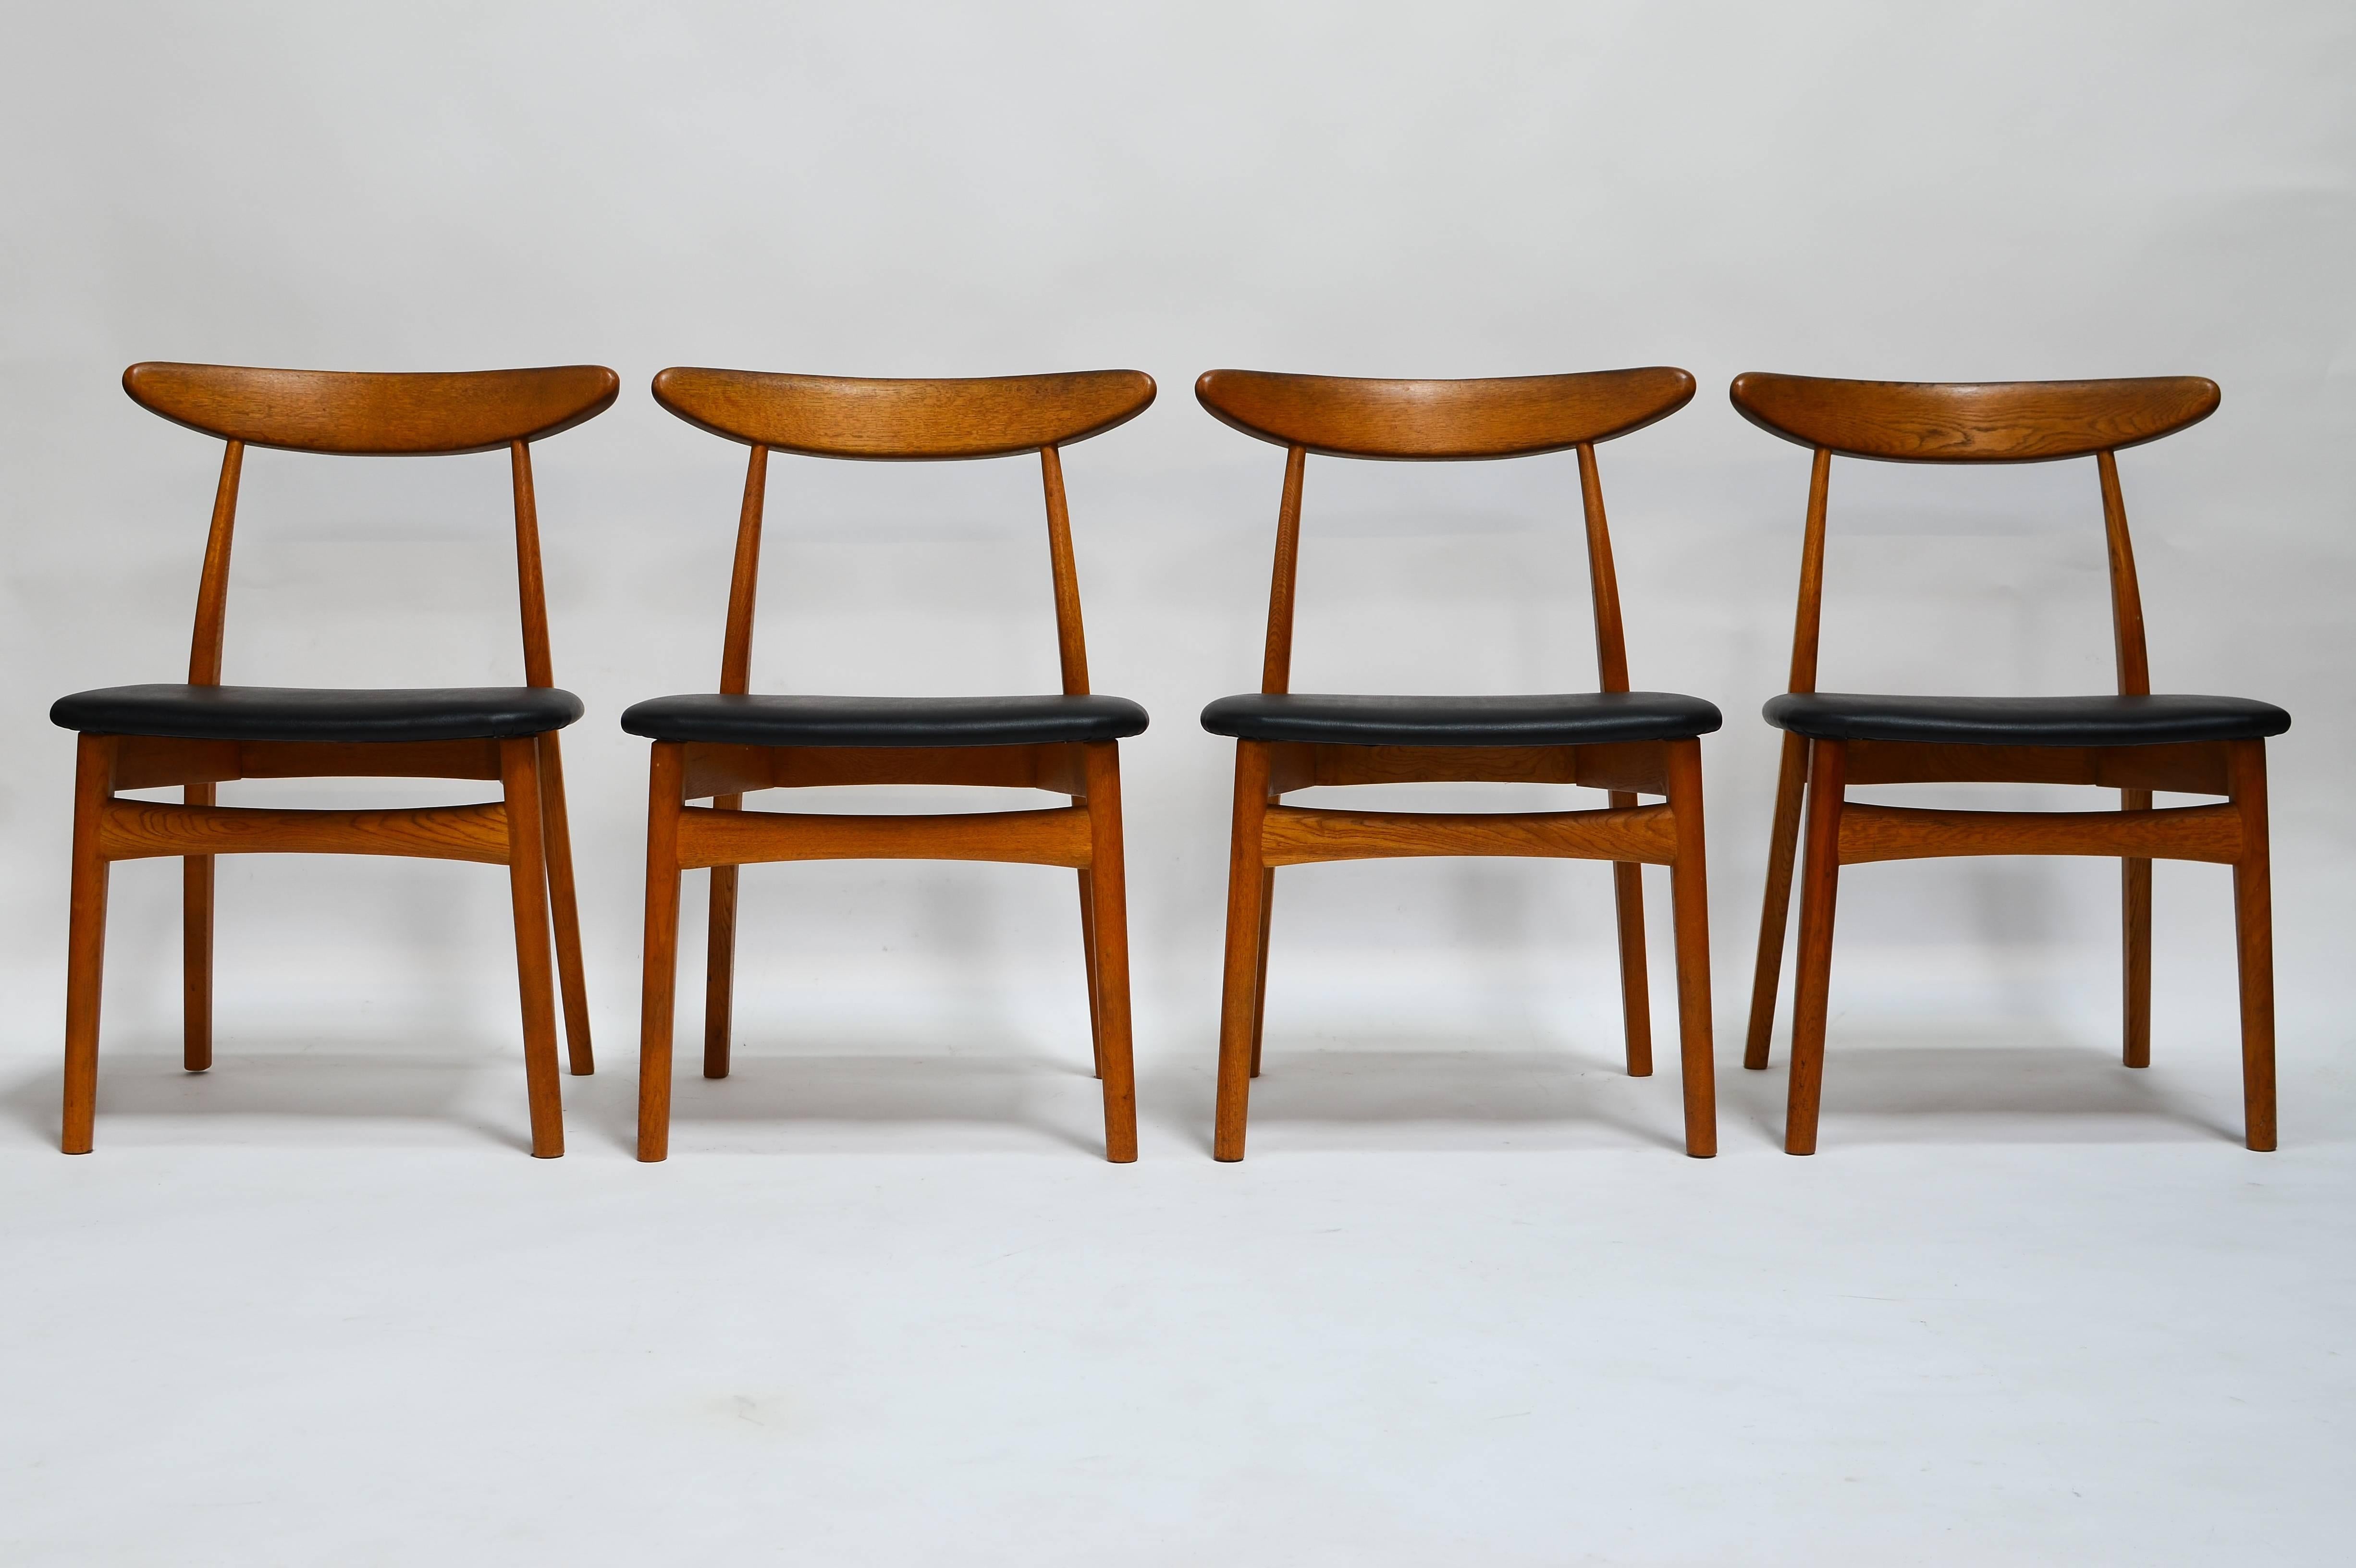 A wonderful set of 8 Mid Century Modern Dining Chairs. The chairs look very Scandinavian, similar to a Hans J. Wegner design, yet are Japanese in origin dating to the late 1950's.

These have been recently upholstered in black Naugahyde and expert